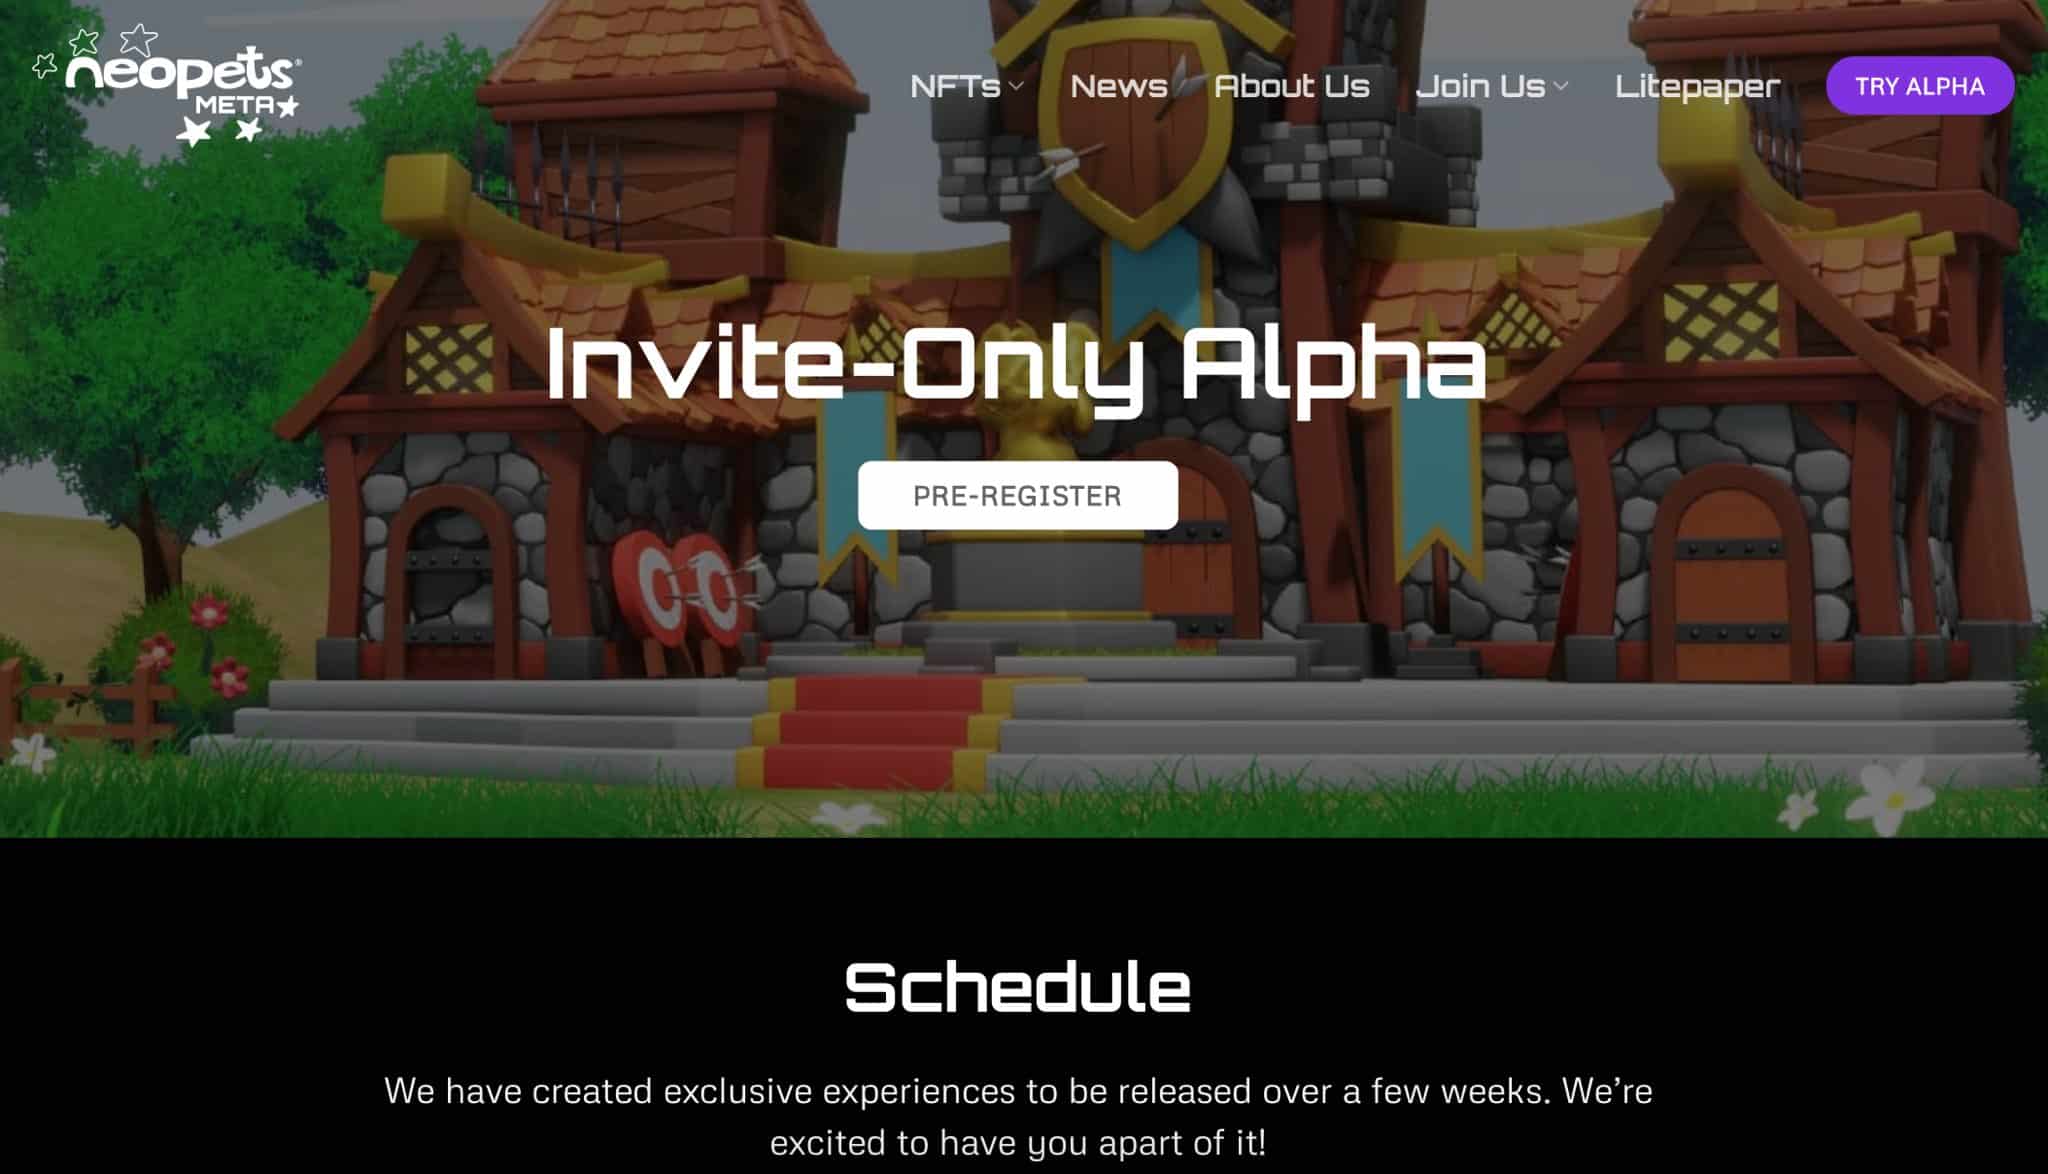 screenshot of the invite-only alpha version